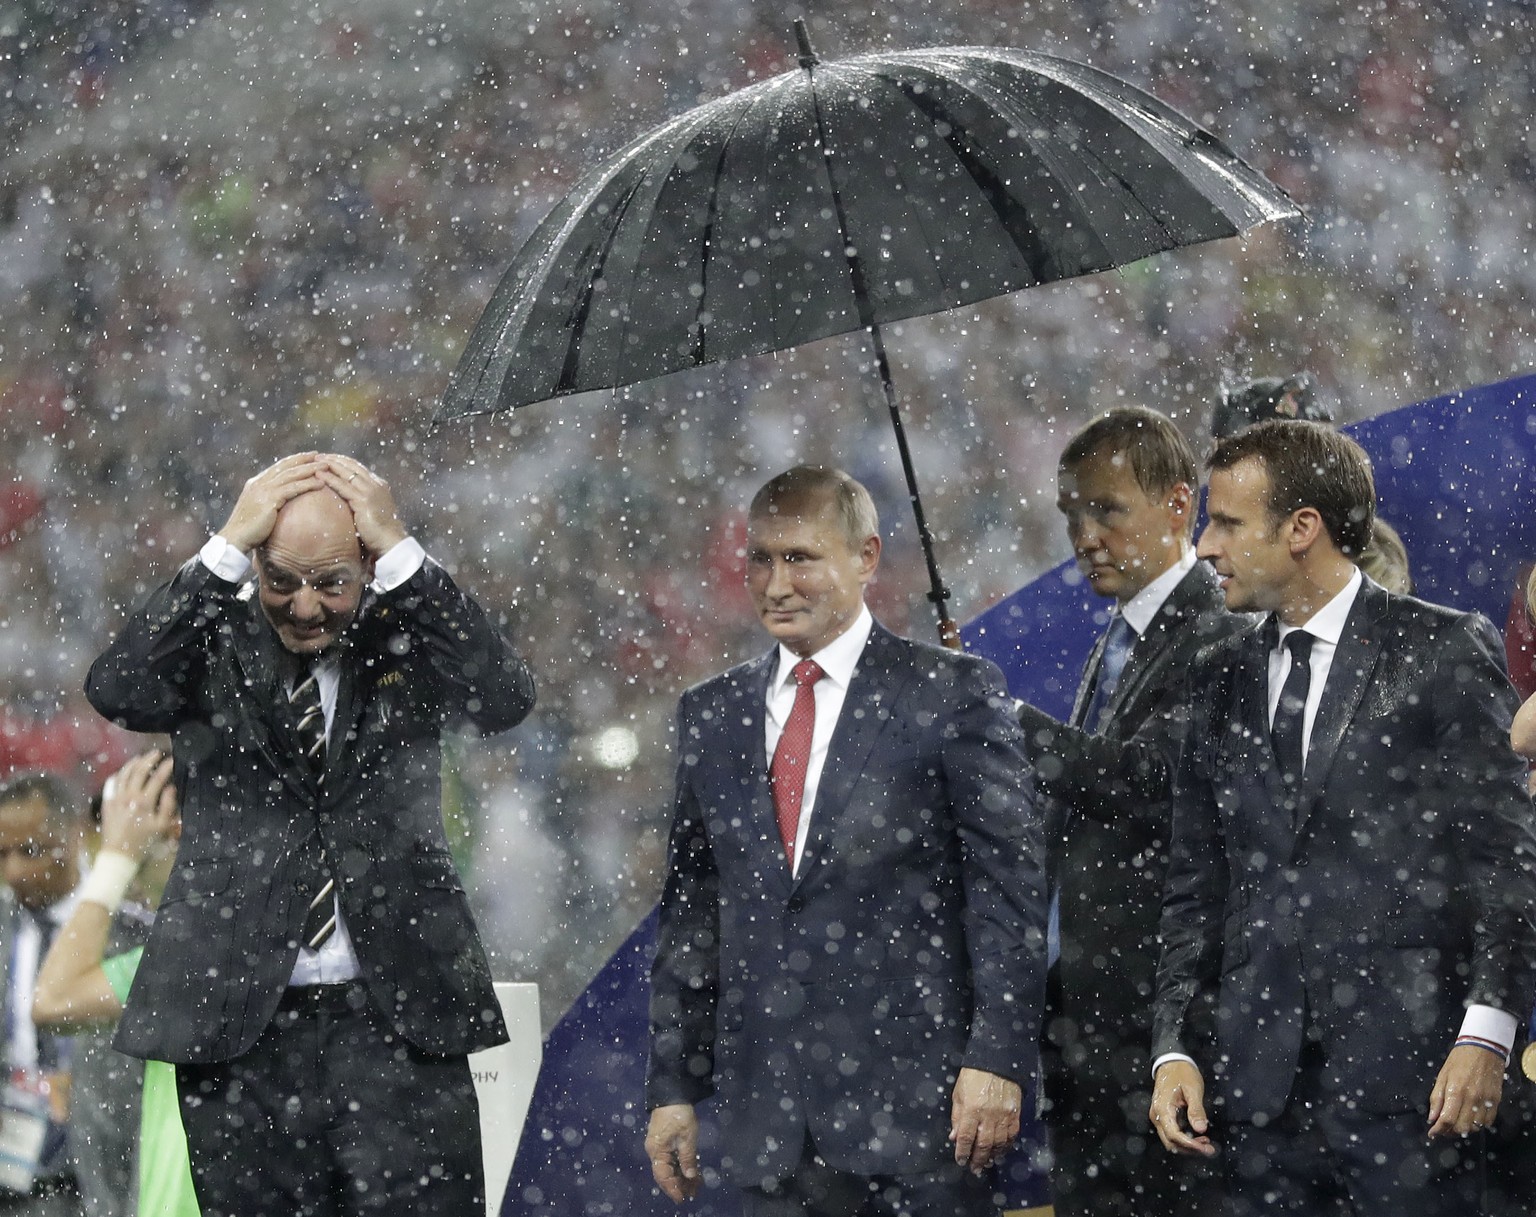 FIFA President Gianni Infantino, left, gestures as Russian President Vladimir Putin stands underneath an umbrella watched by French President Emmanuel Macron after the final match between France and C ...